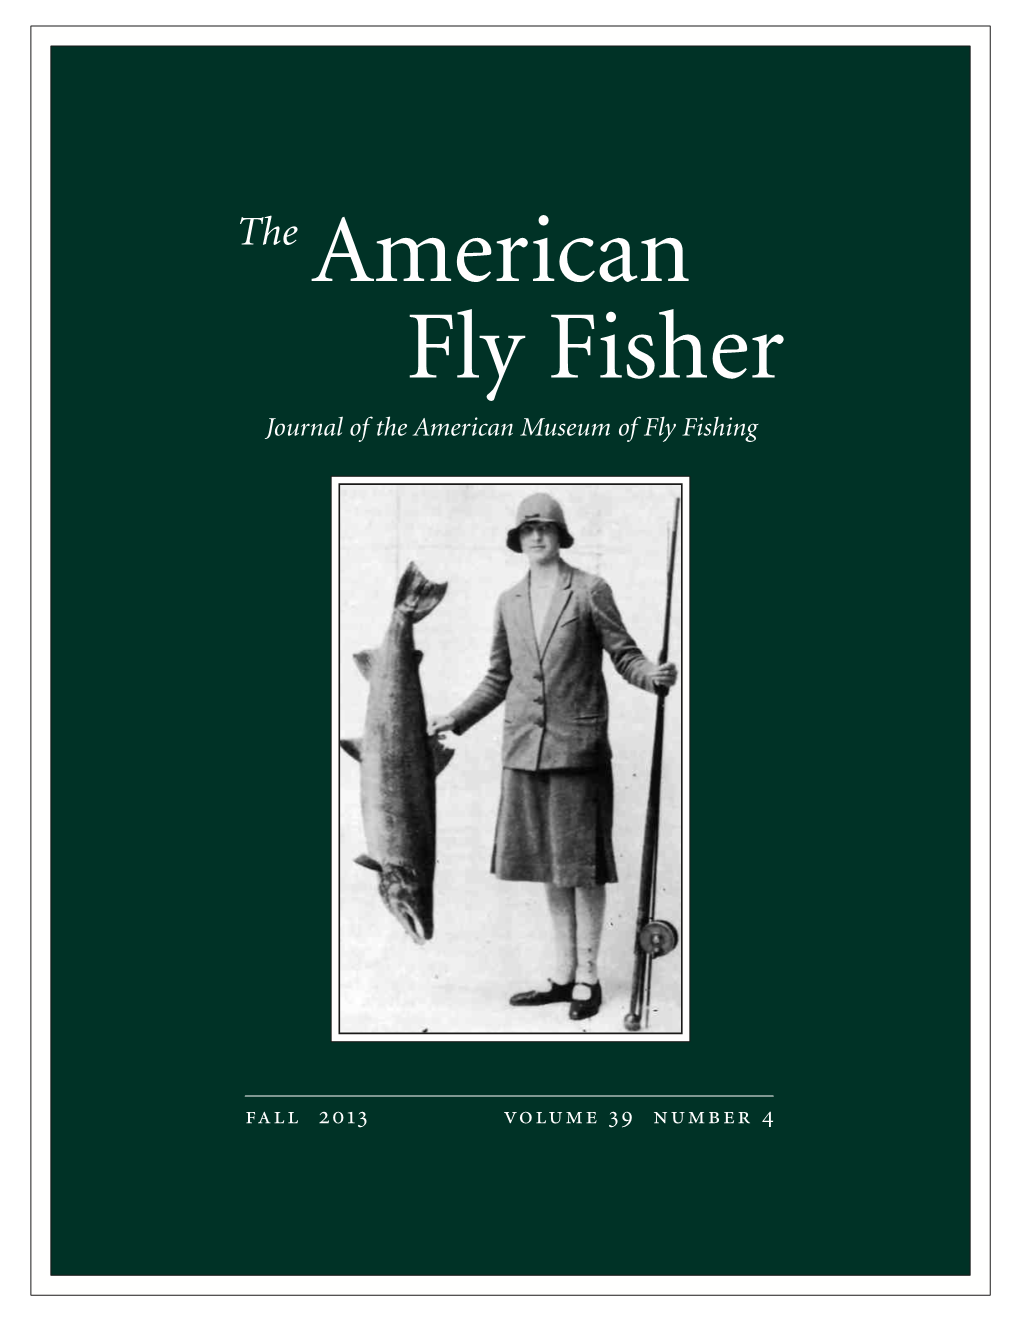 Journal of the American Museum of Fly Fishing